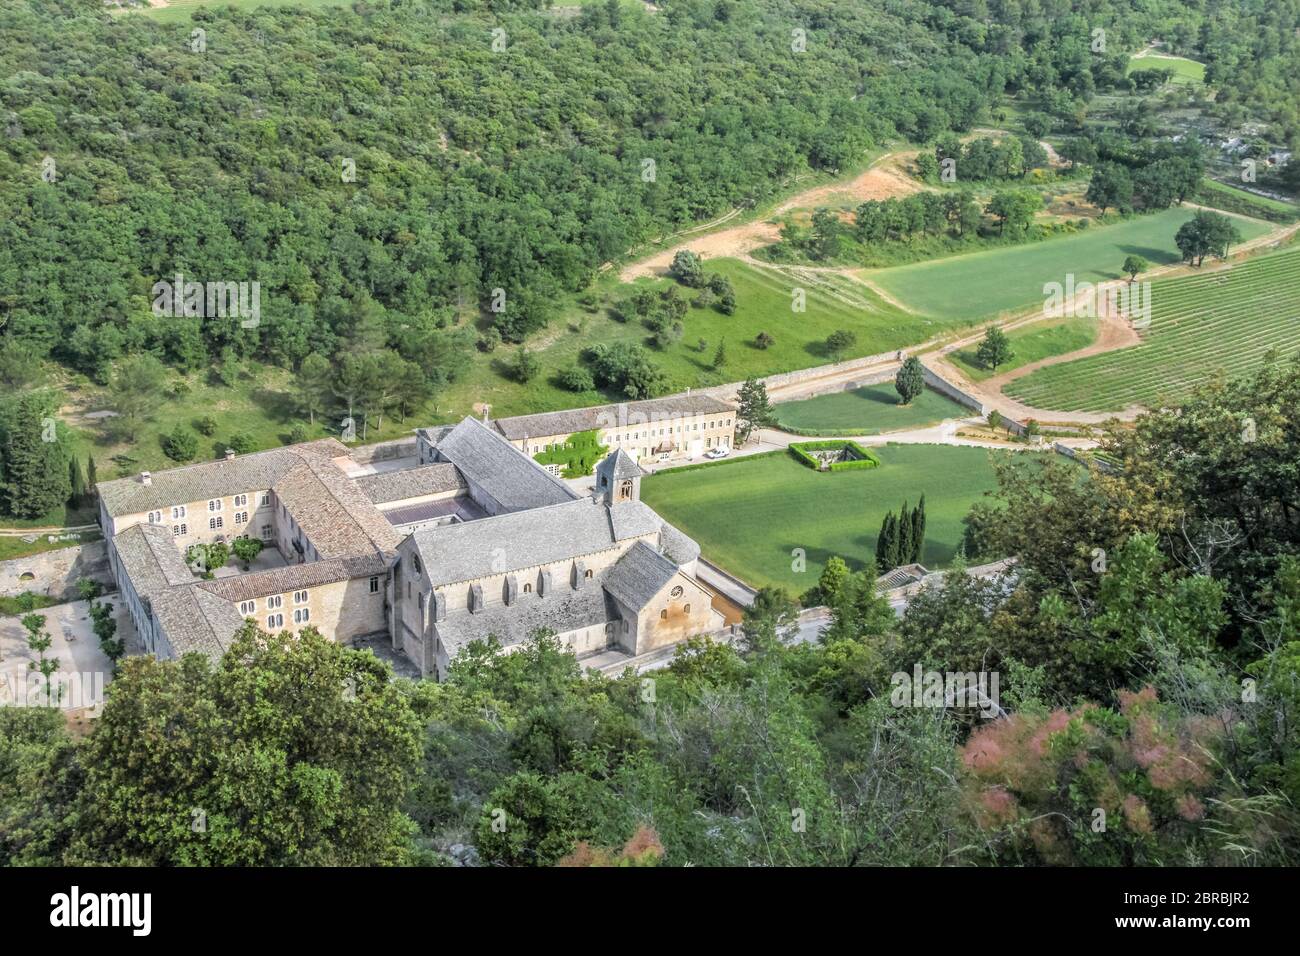 View of the Senanque Abbey in the Luberon, Provence, France Stock Photo